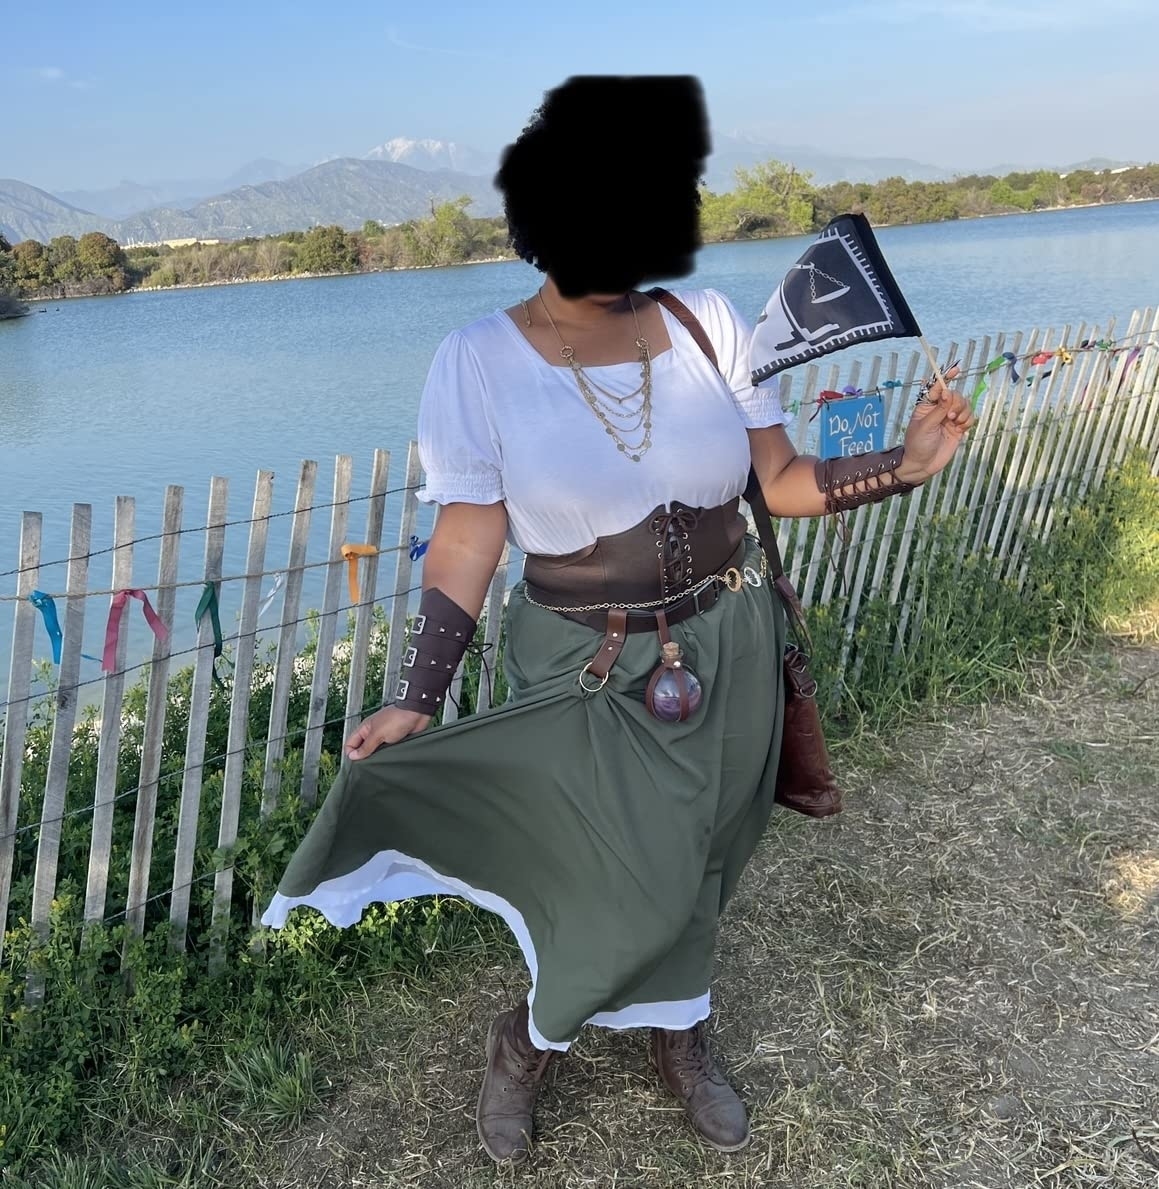 Person in fantasy-inspired outfit with accessories, holding a book, outdoors near a fence